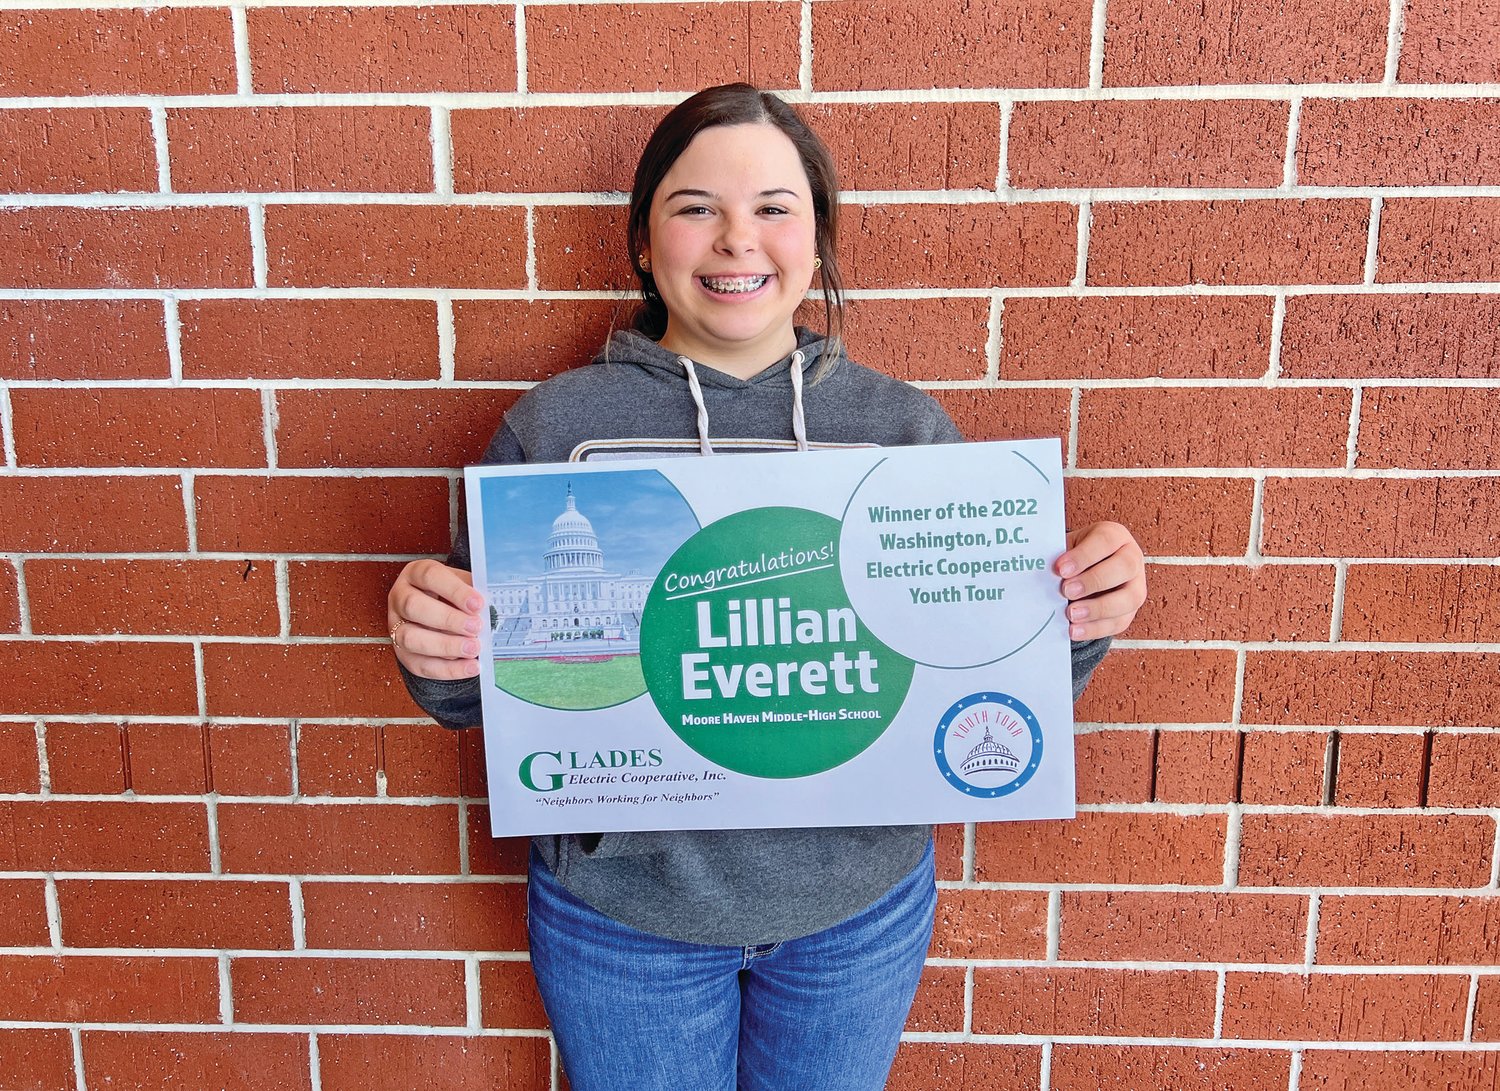 Lillian Everett of Moore Haven Middle-High School and will participate in the National Rural Electric Cooperative Association’s annual Washington Youth Tour with students from across the nation.